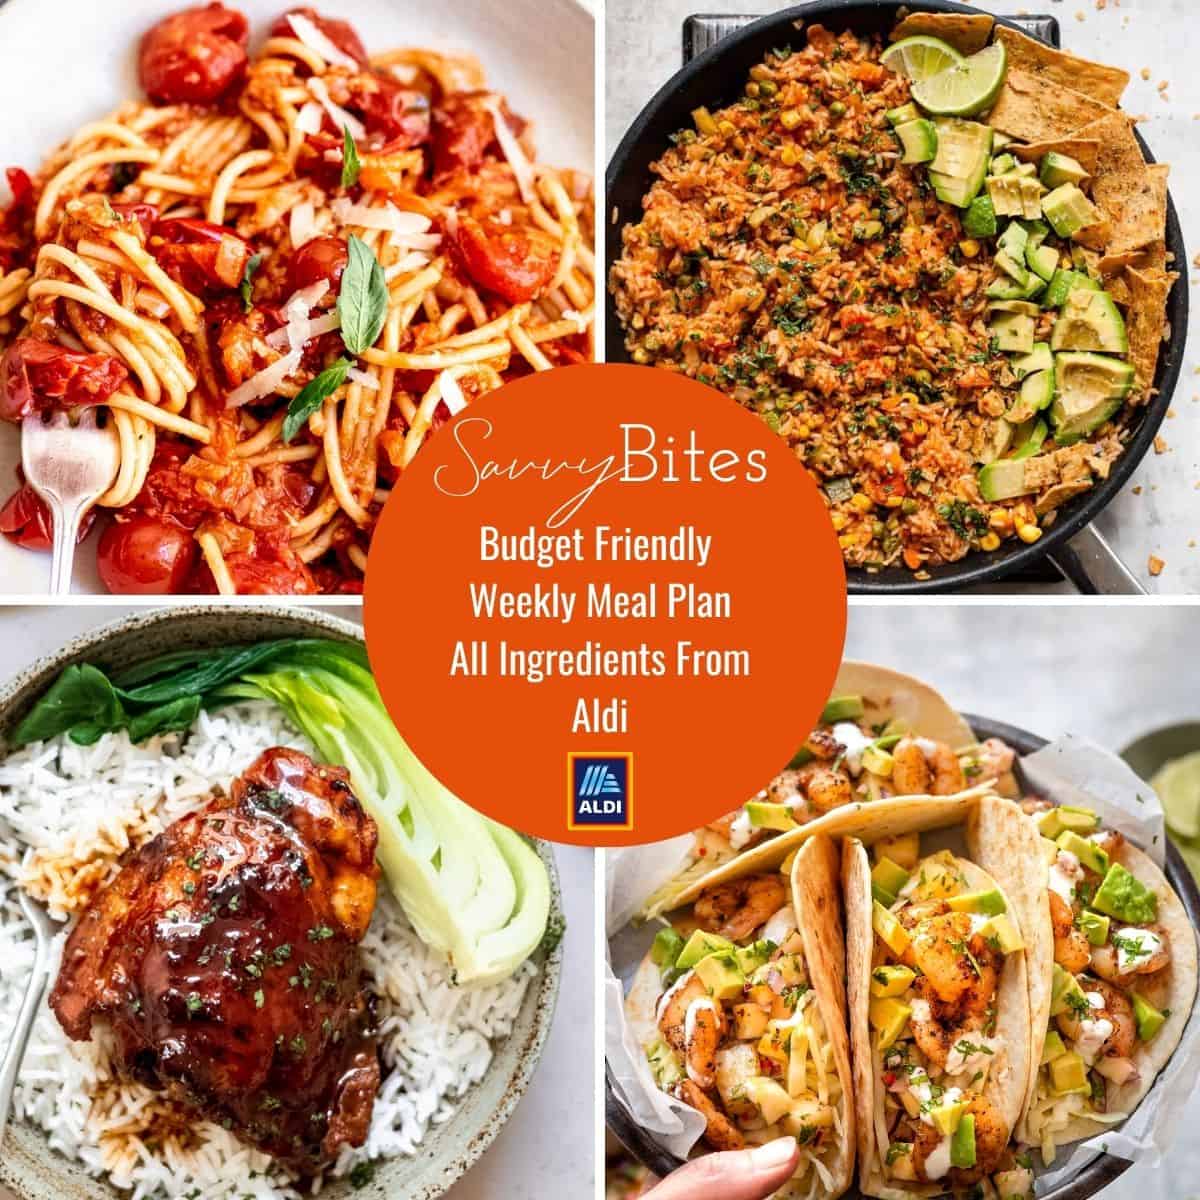 Family budget meal plan with Aldi ingredients.